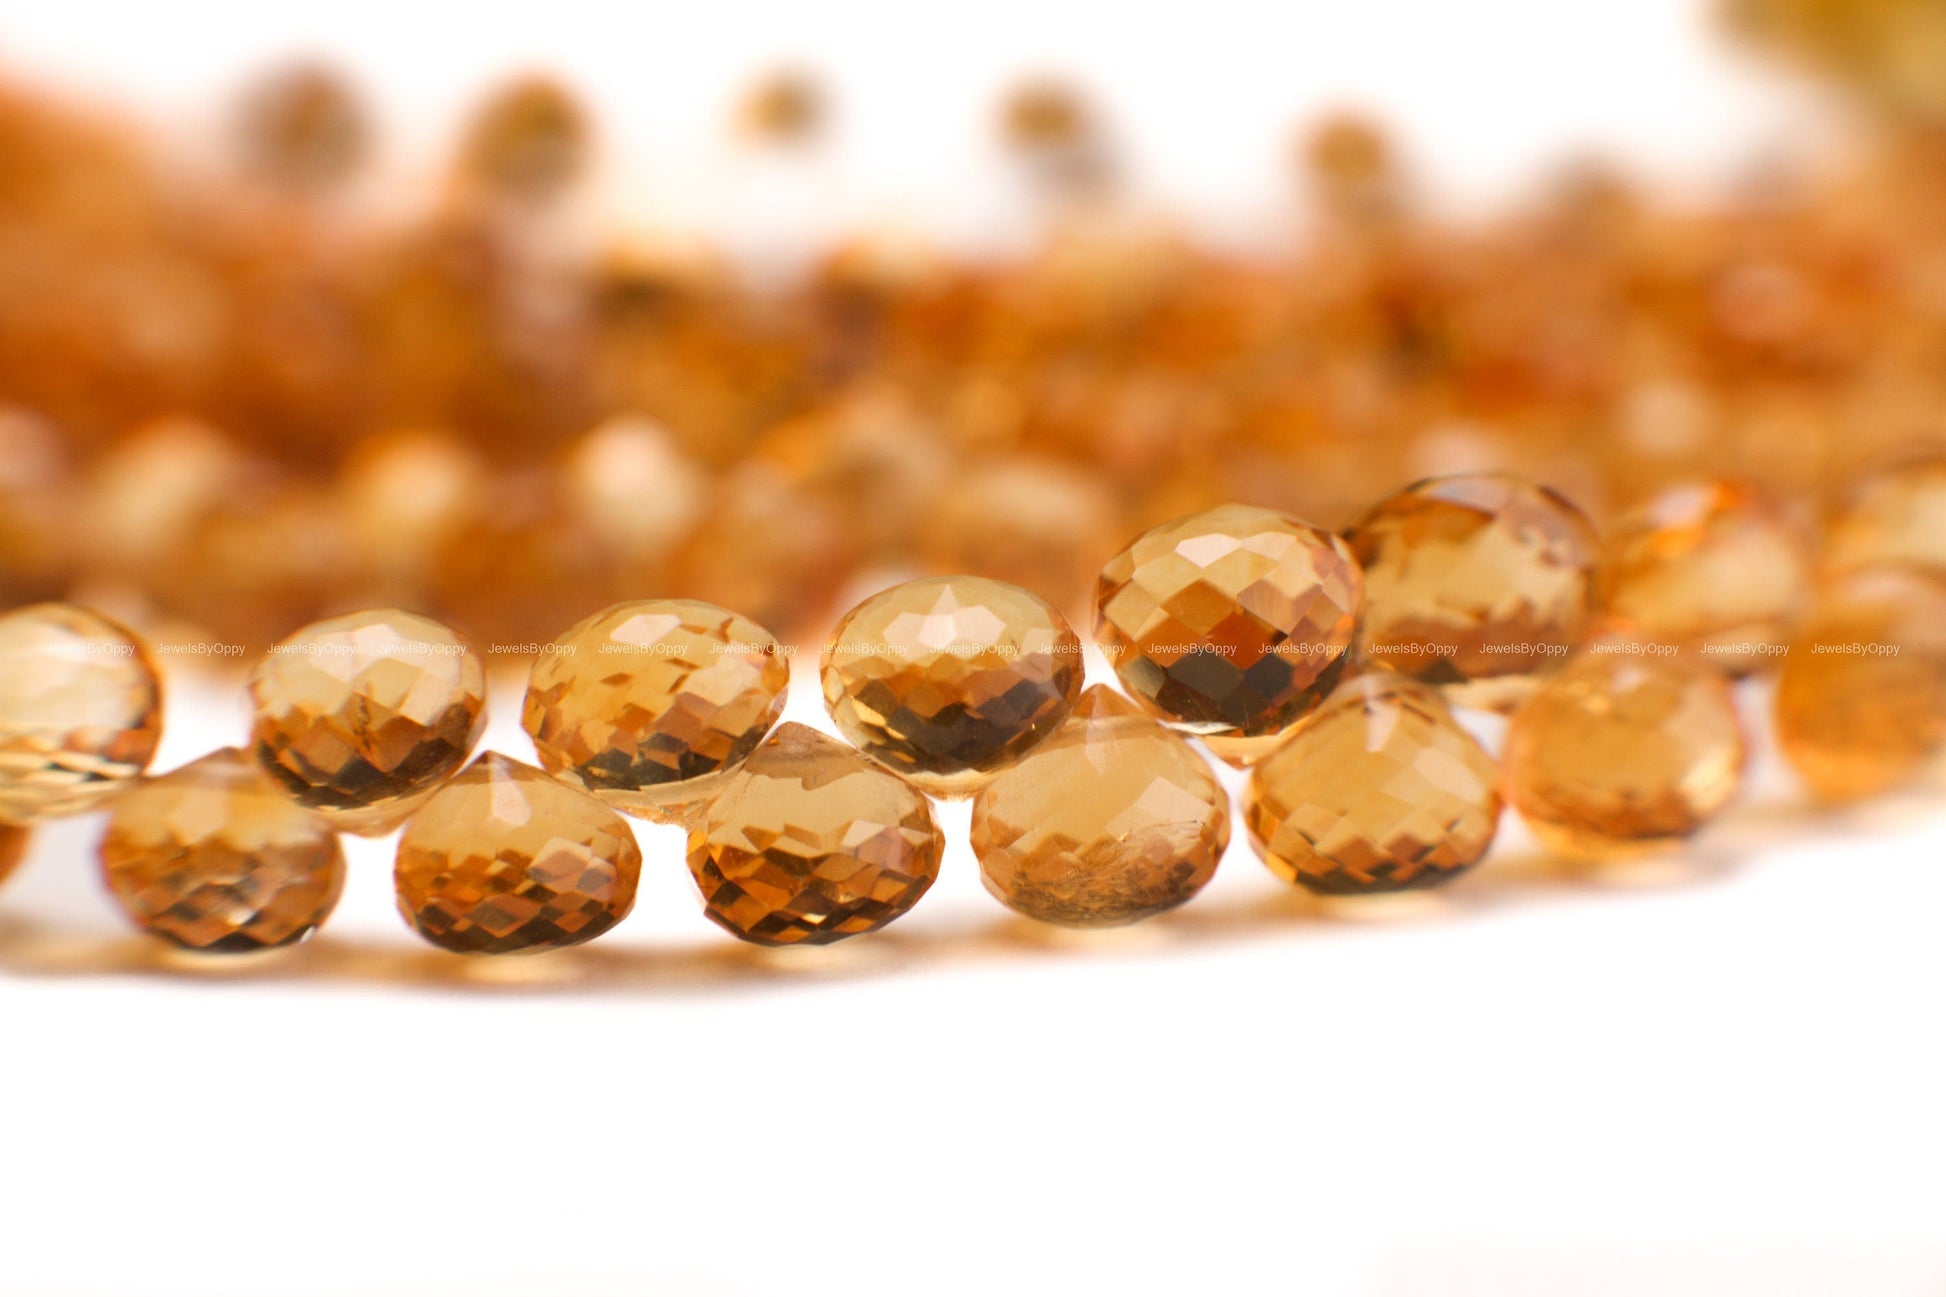 Genuine Citrine Briolette Onion AAA Natural Faceted Teardrop Onion Shape 4.5-9.5mm Gemstone DIY High End Jewelry Making Beads 9Pcs or 18Pcs